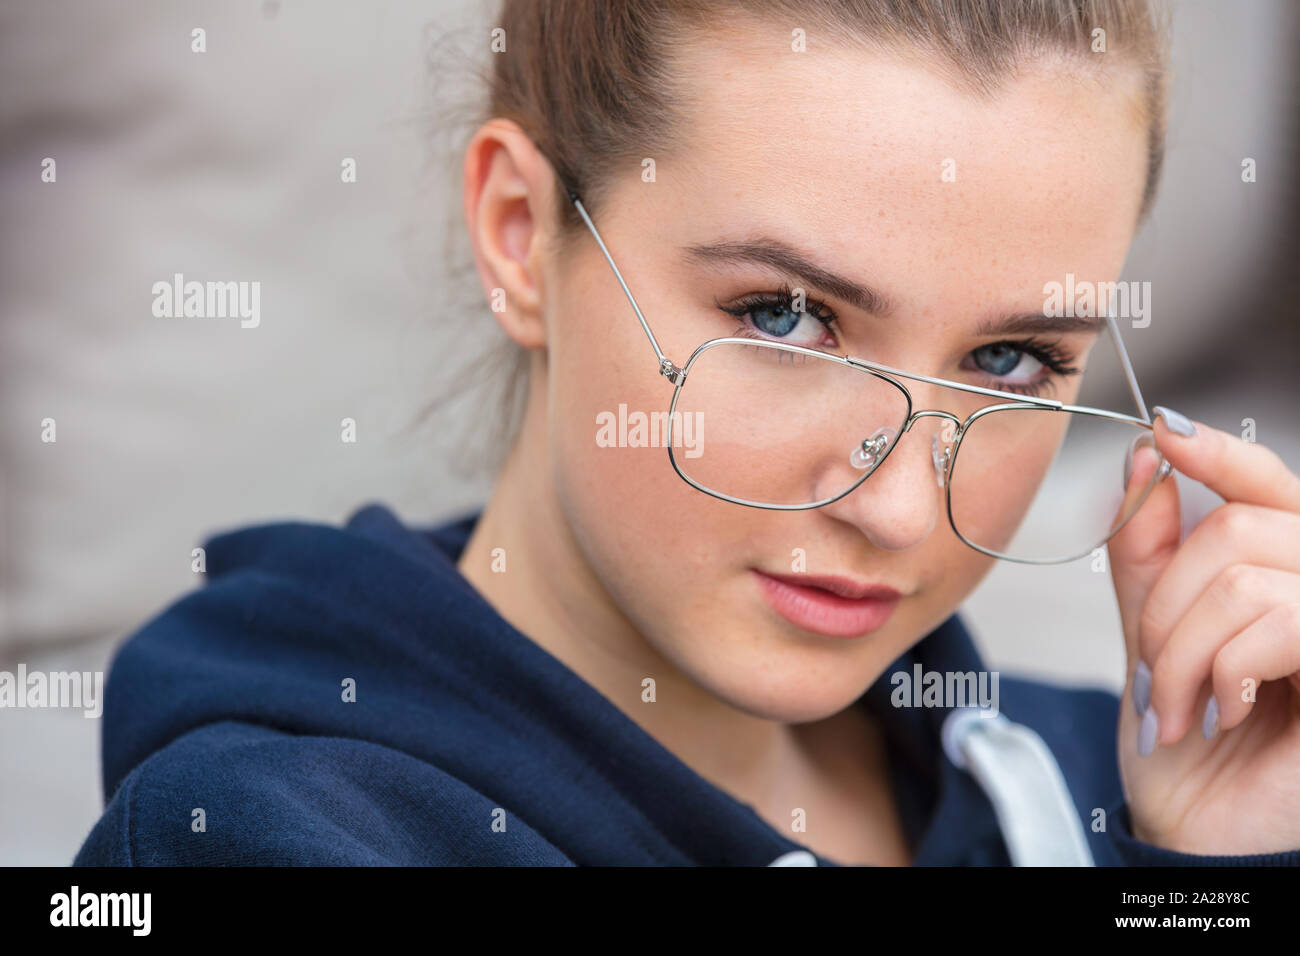 Cheerful Pretty Girl Wearing Glasses. Isolated Stock Image - Image of  female, brunette: 129367037